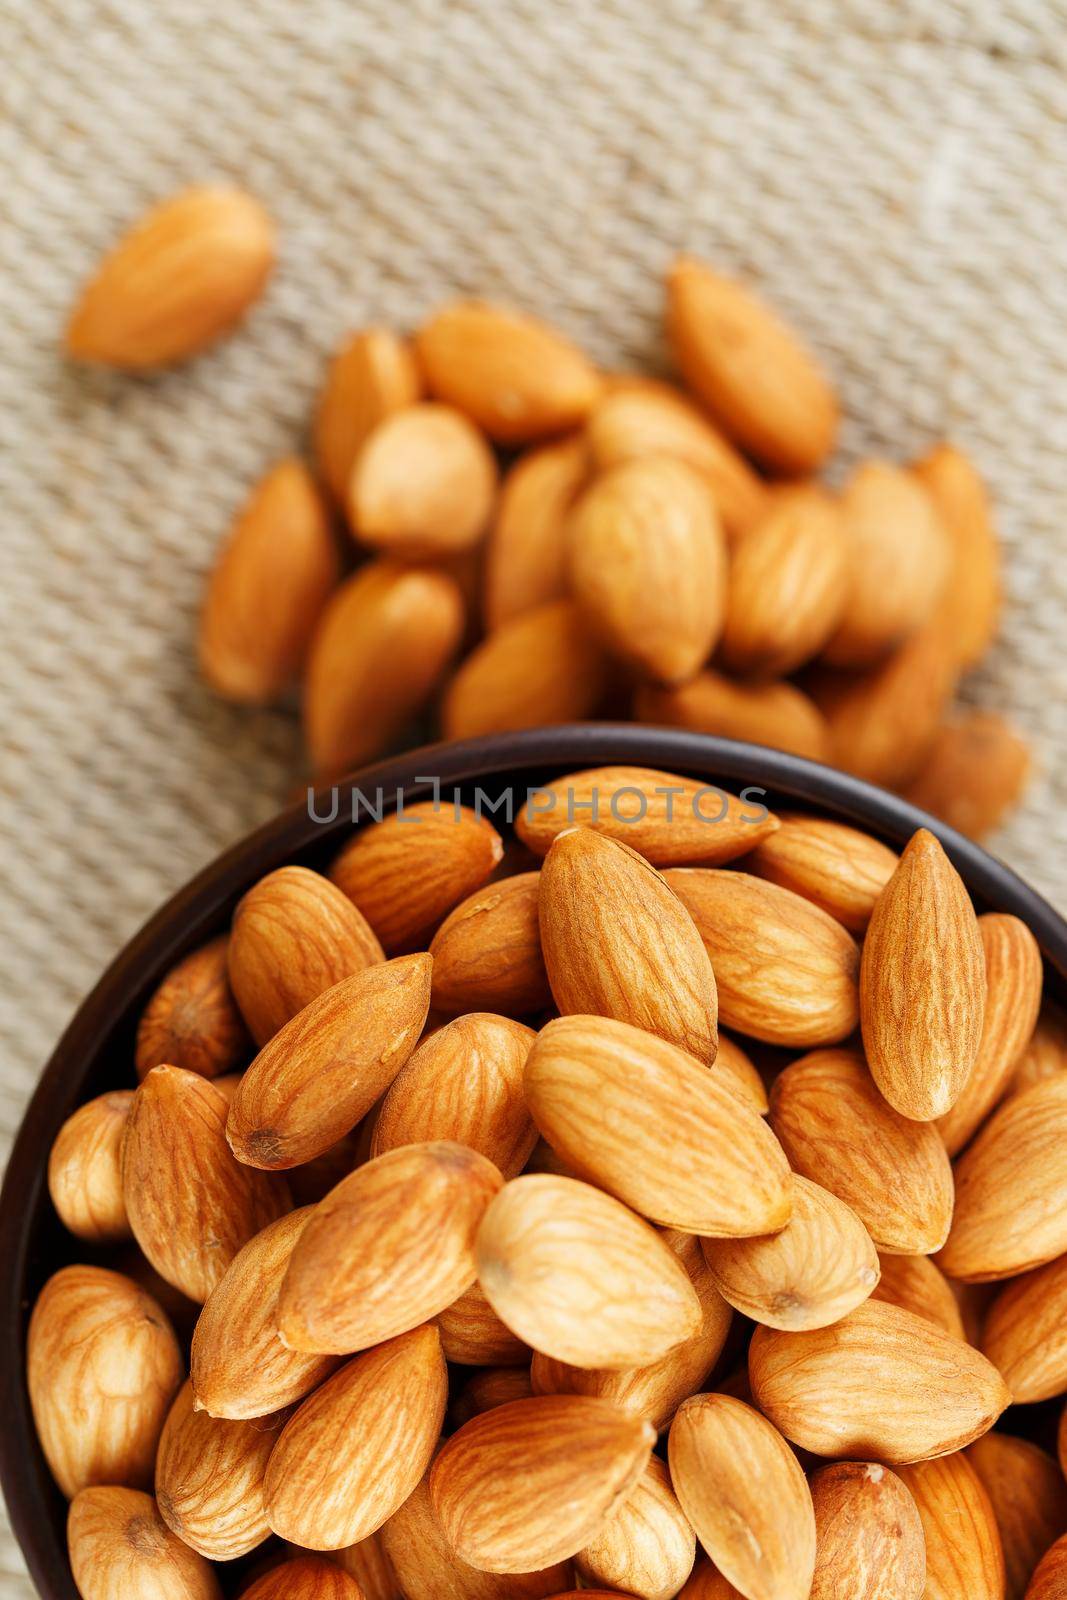 Almonds in a wooden cup on a burlap cloth background. Golden almond closeup in dark brown cup